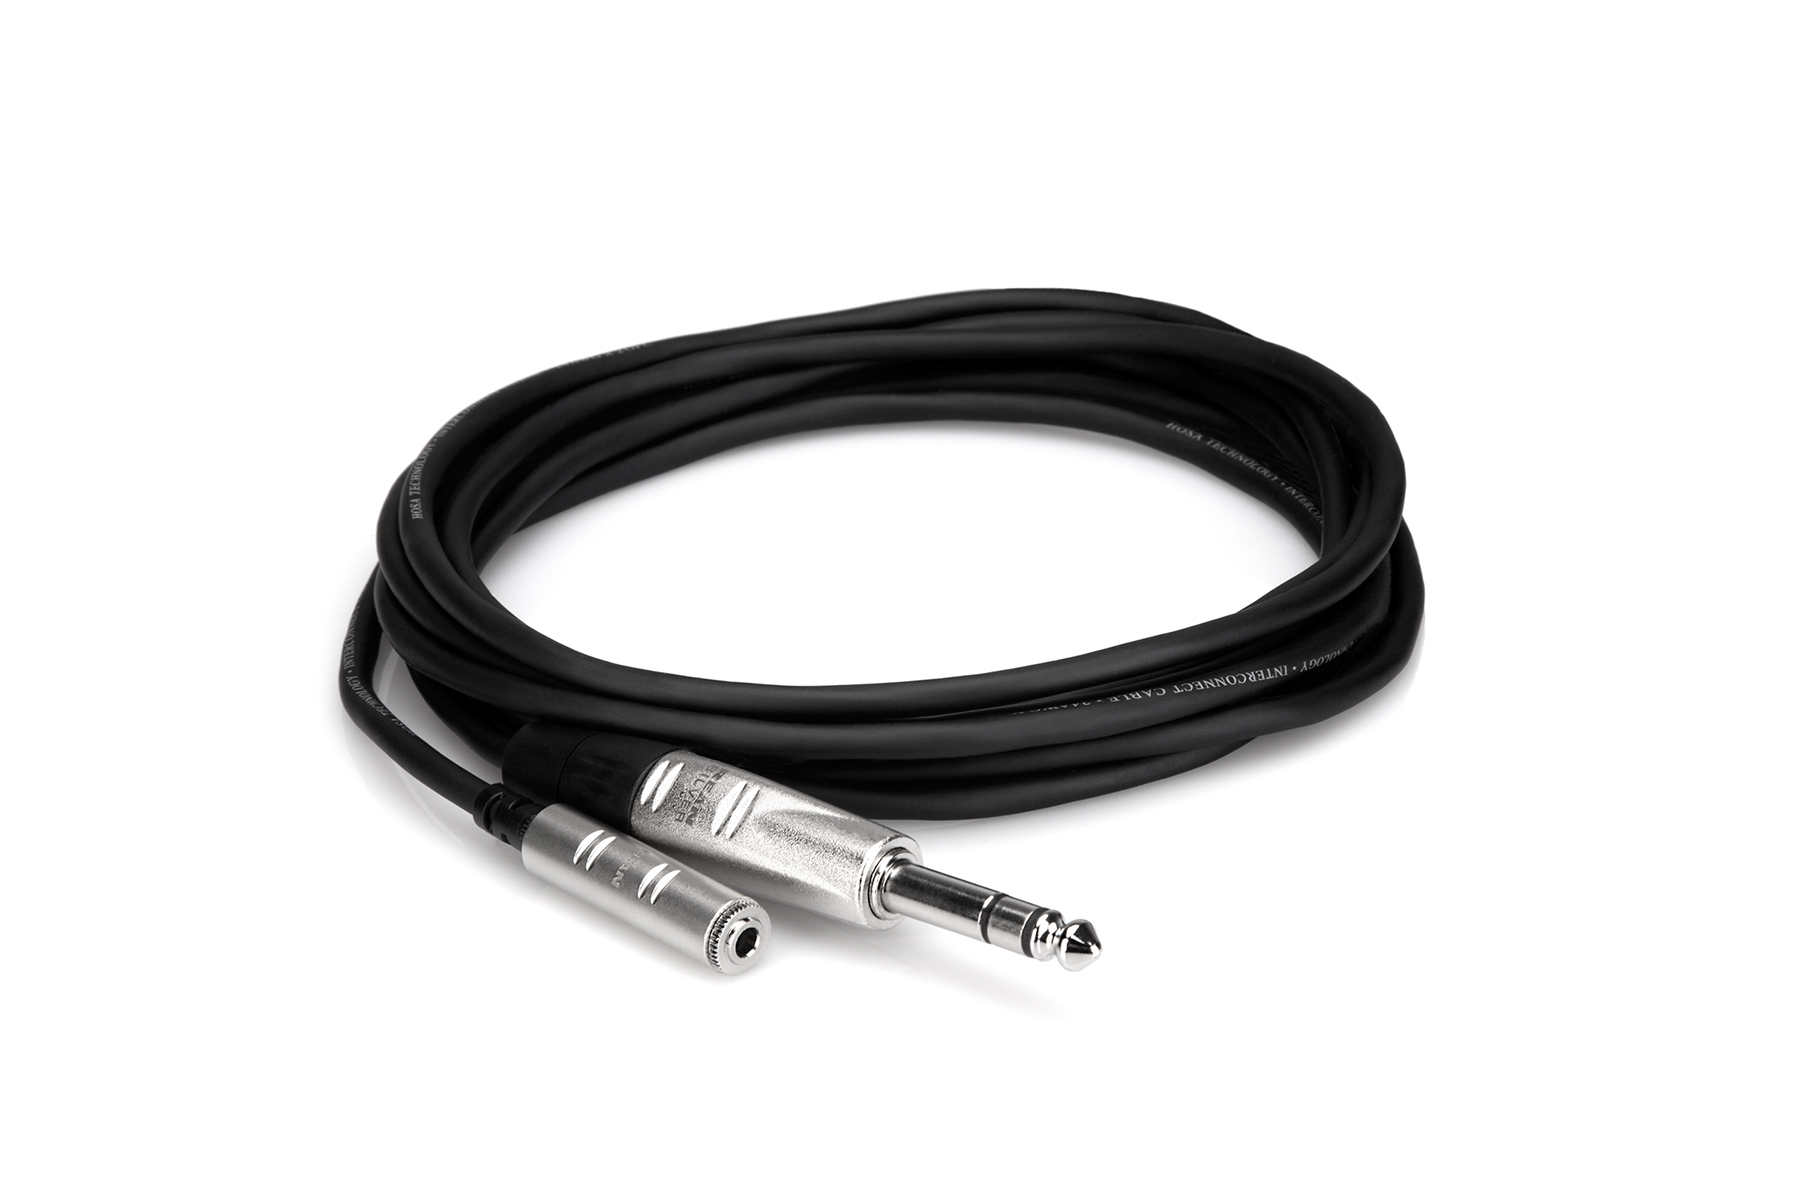 Photos - Cable (video, audio, USB) Hosa HXMS-025 25' Pro Series 3.5mm TRS to 1/4 TRS Headphone Extension Cabl 